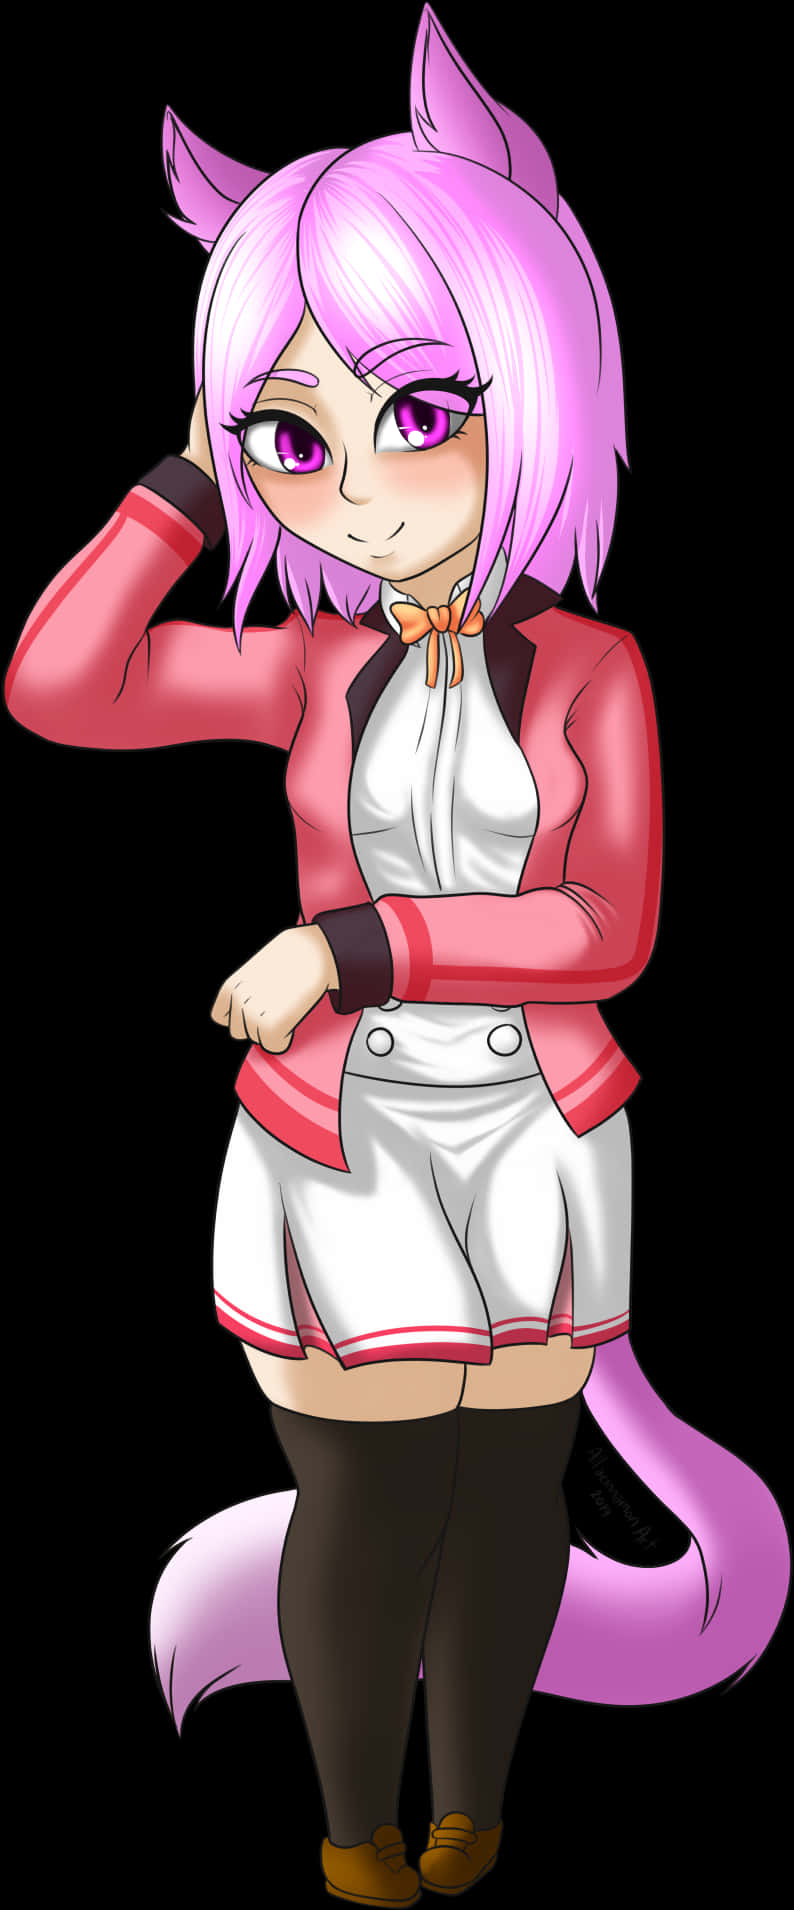 Chibi Anime Characterwith Pink Hairand Tail PNG